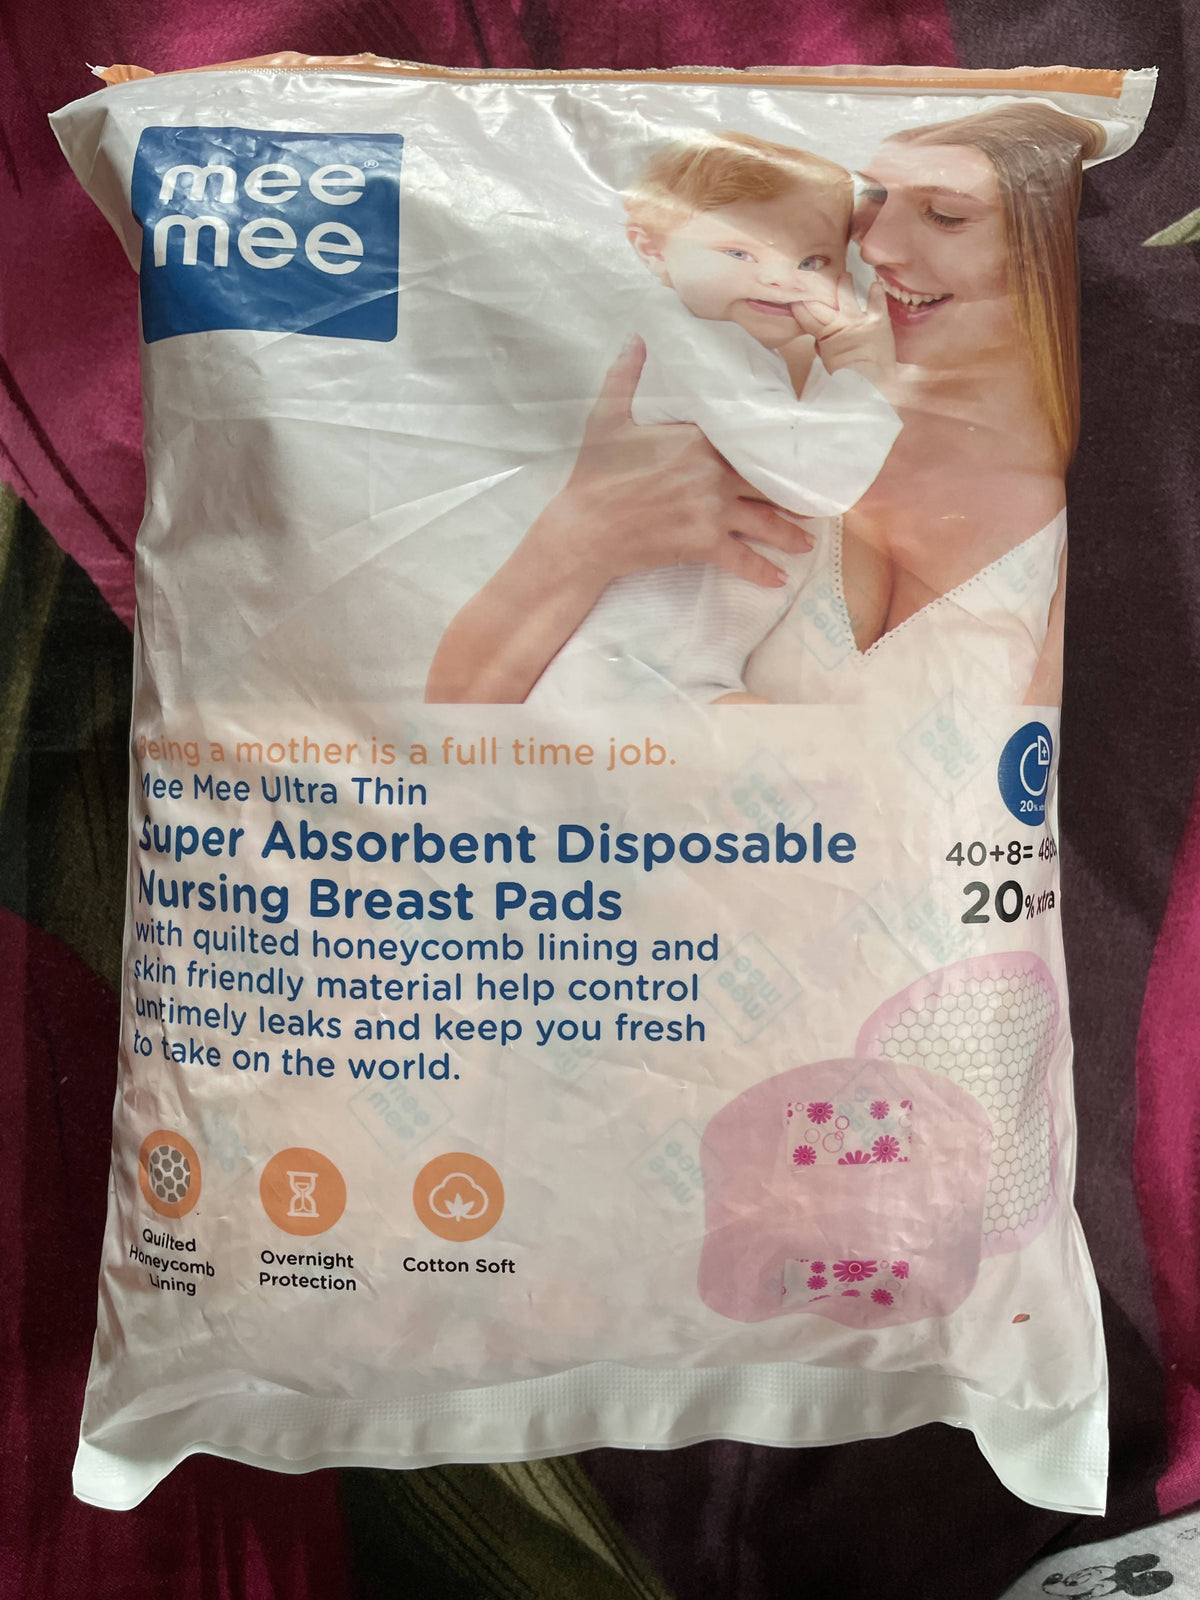 Mee mee ultra thin disposable nursing breast pads